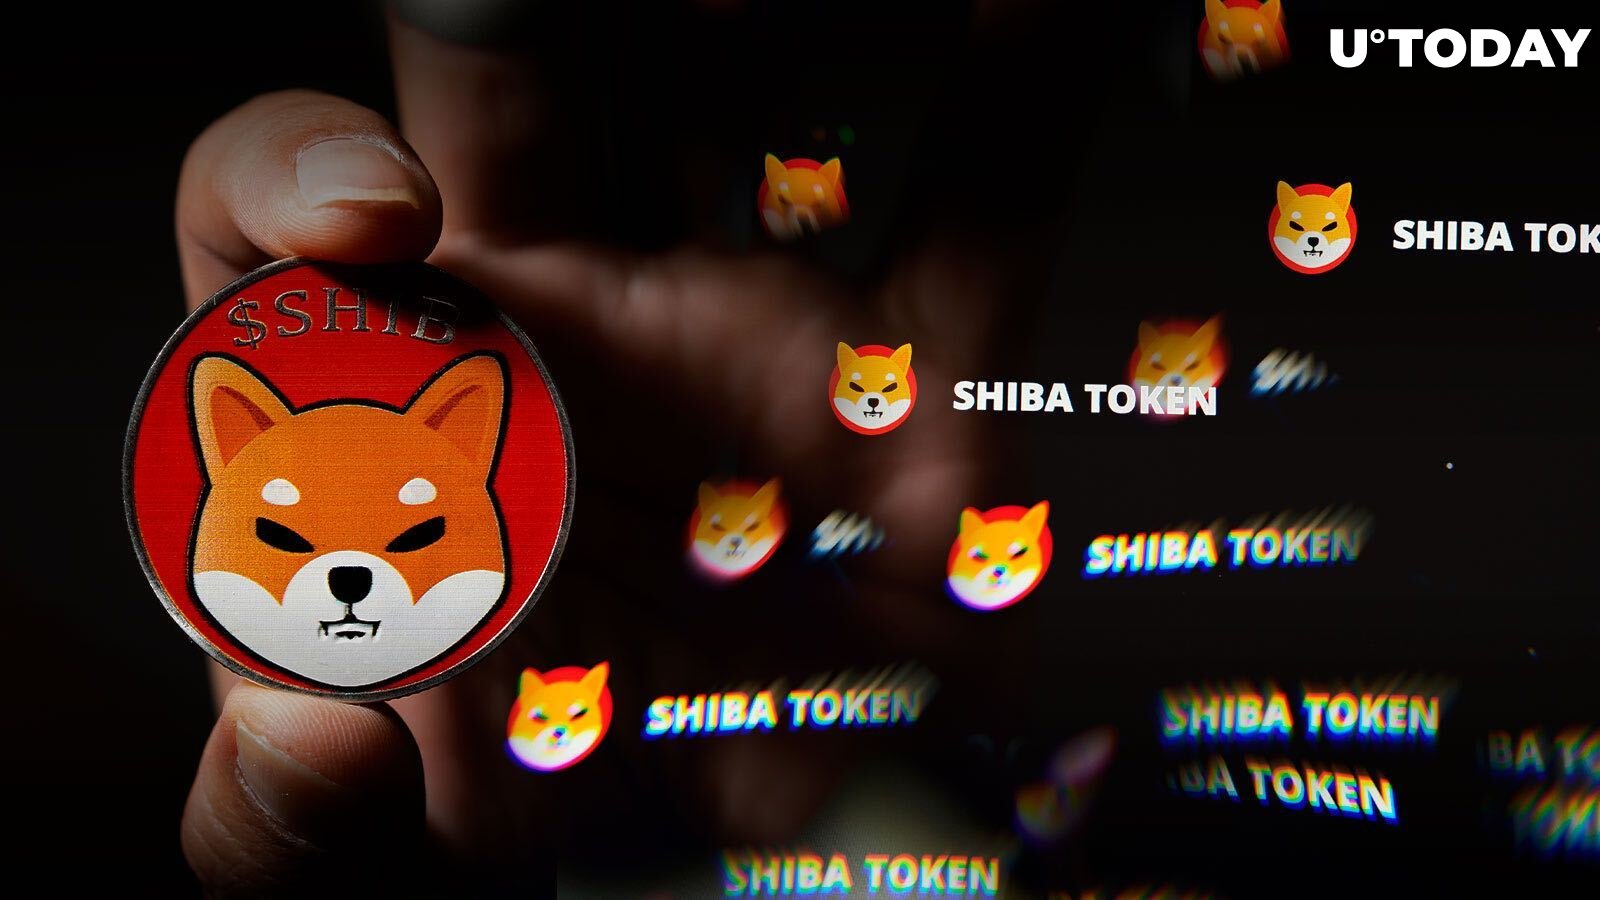 Shiba Inu Social Mentions Reach Highest Point in 3 Months